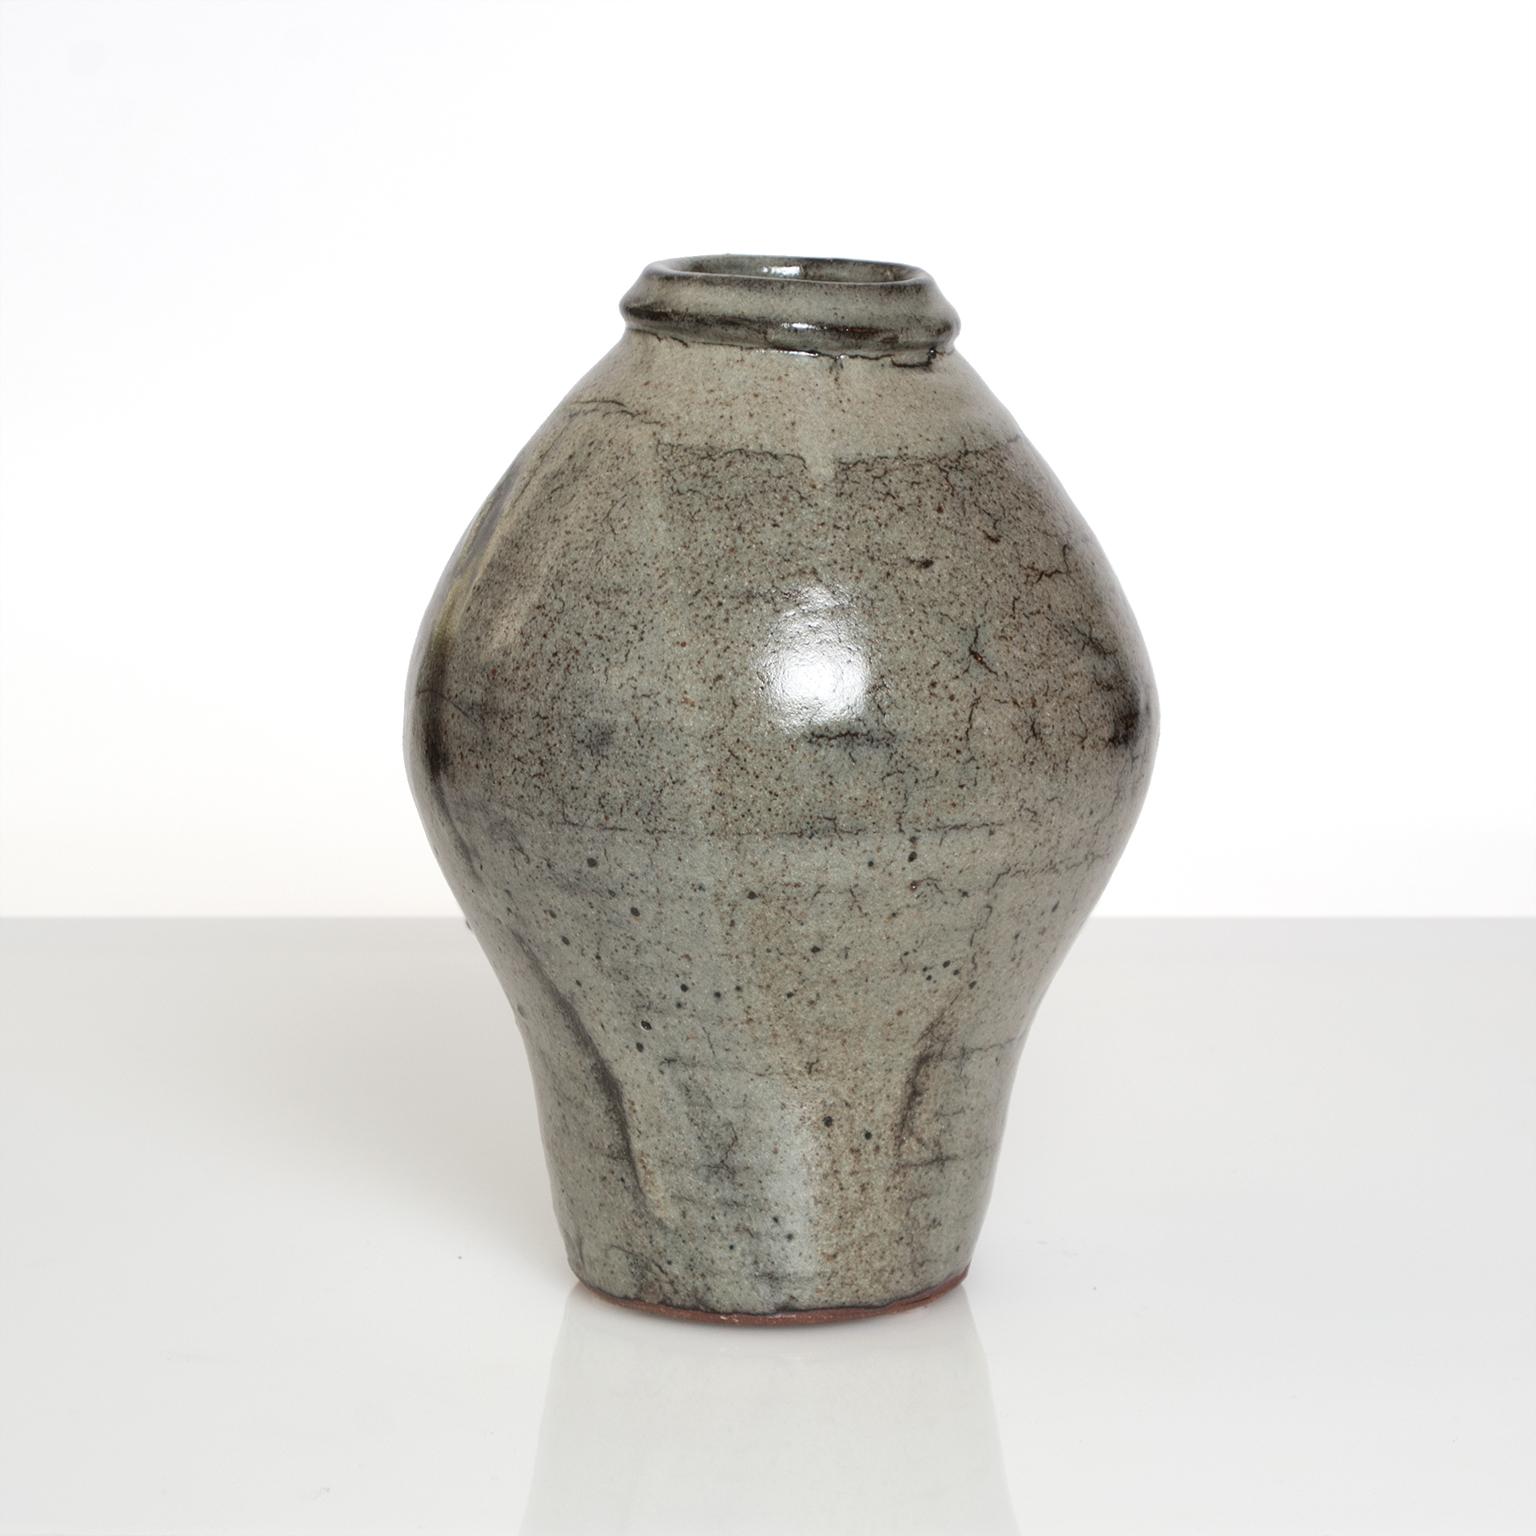 A wheel-thrown stoneware vase by Trevor Corser made at the The Leach Pottery in St. Ives, Cornwall, England. Corser started as an apprentice with the Leach Pottery in the 1960s and studied under Bernard Leach. He worked with Janet Leach until her